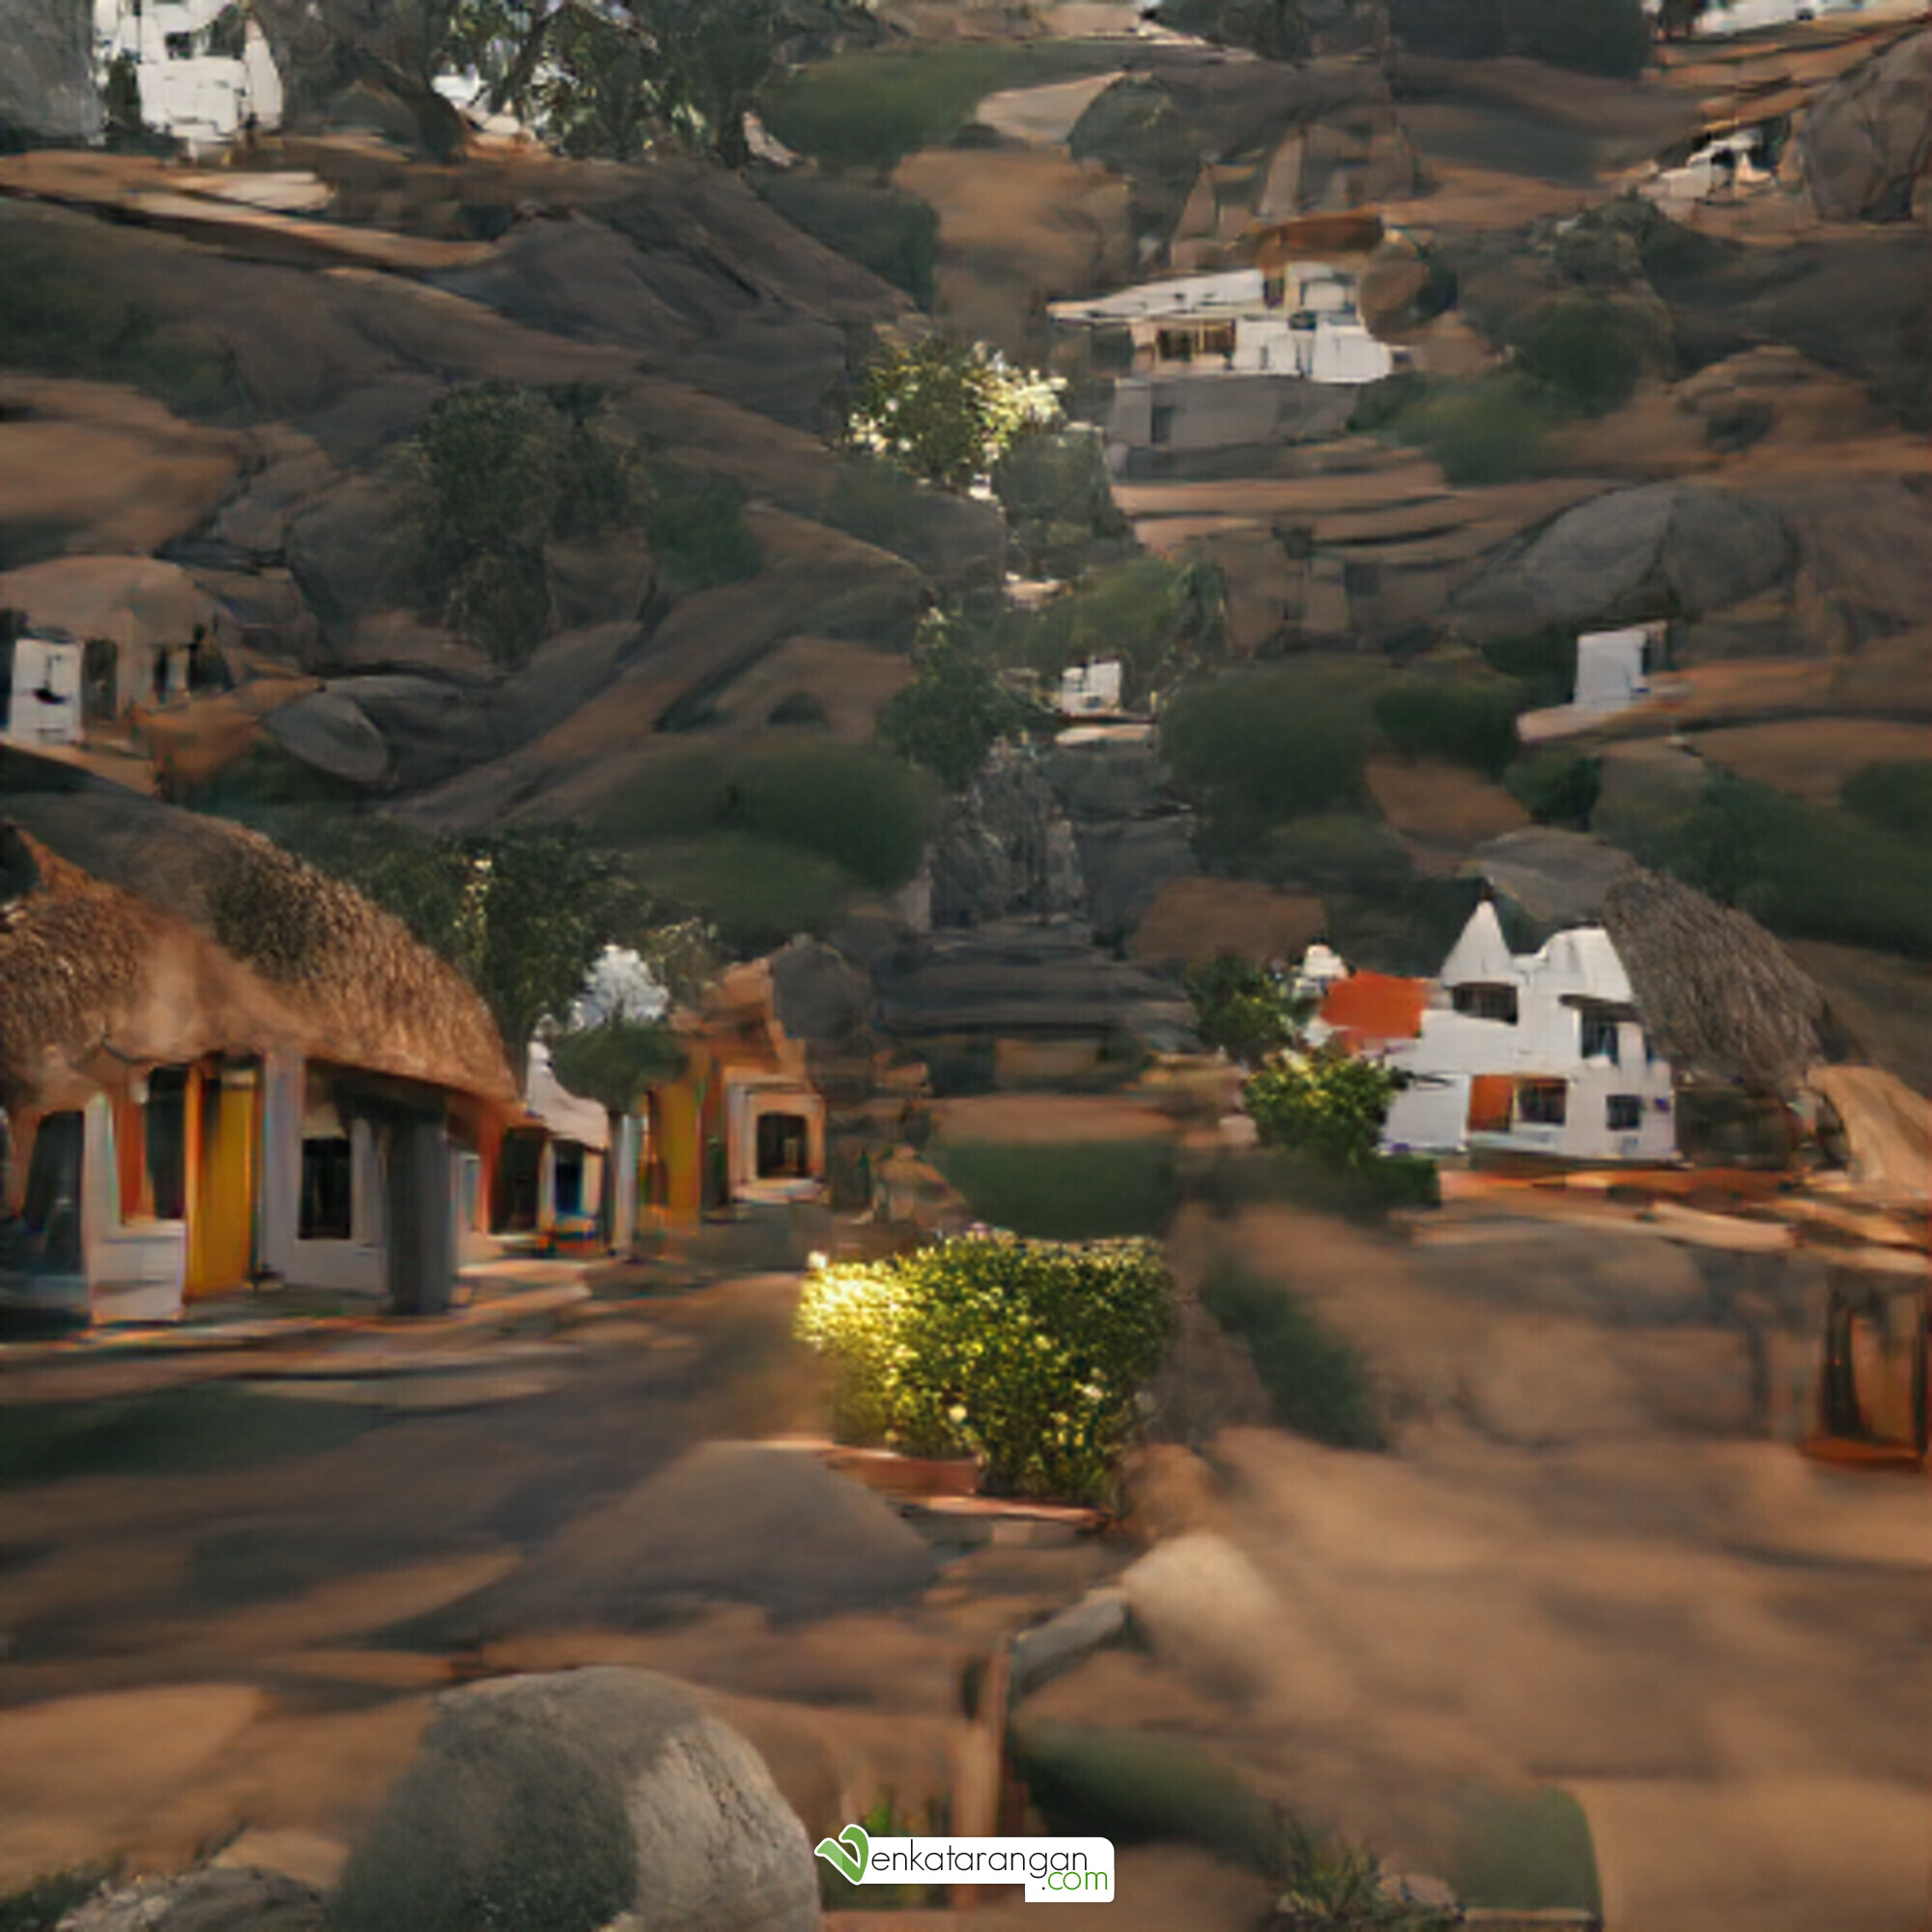 Generated images for the caption "south india village, Unreal Engine" with VQGAN and OpenAI CLIP, machine learning frameworks.